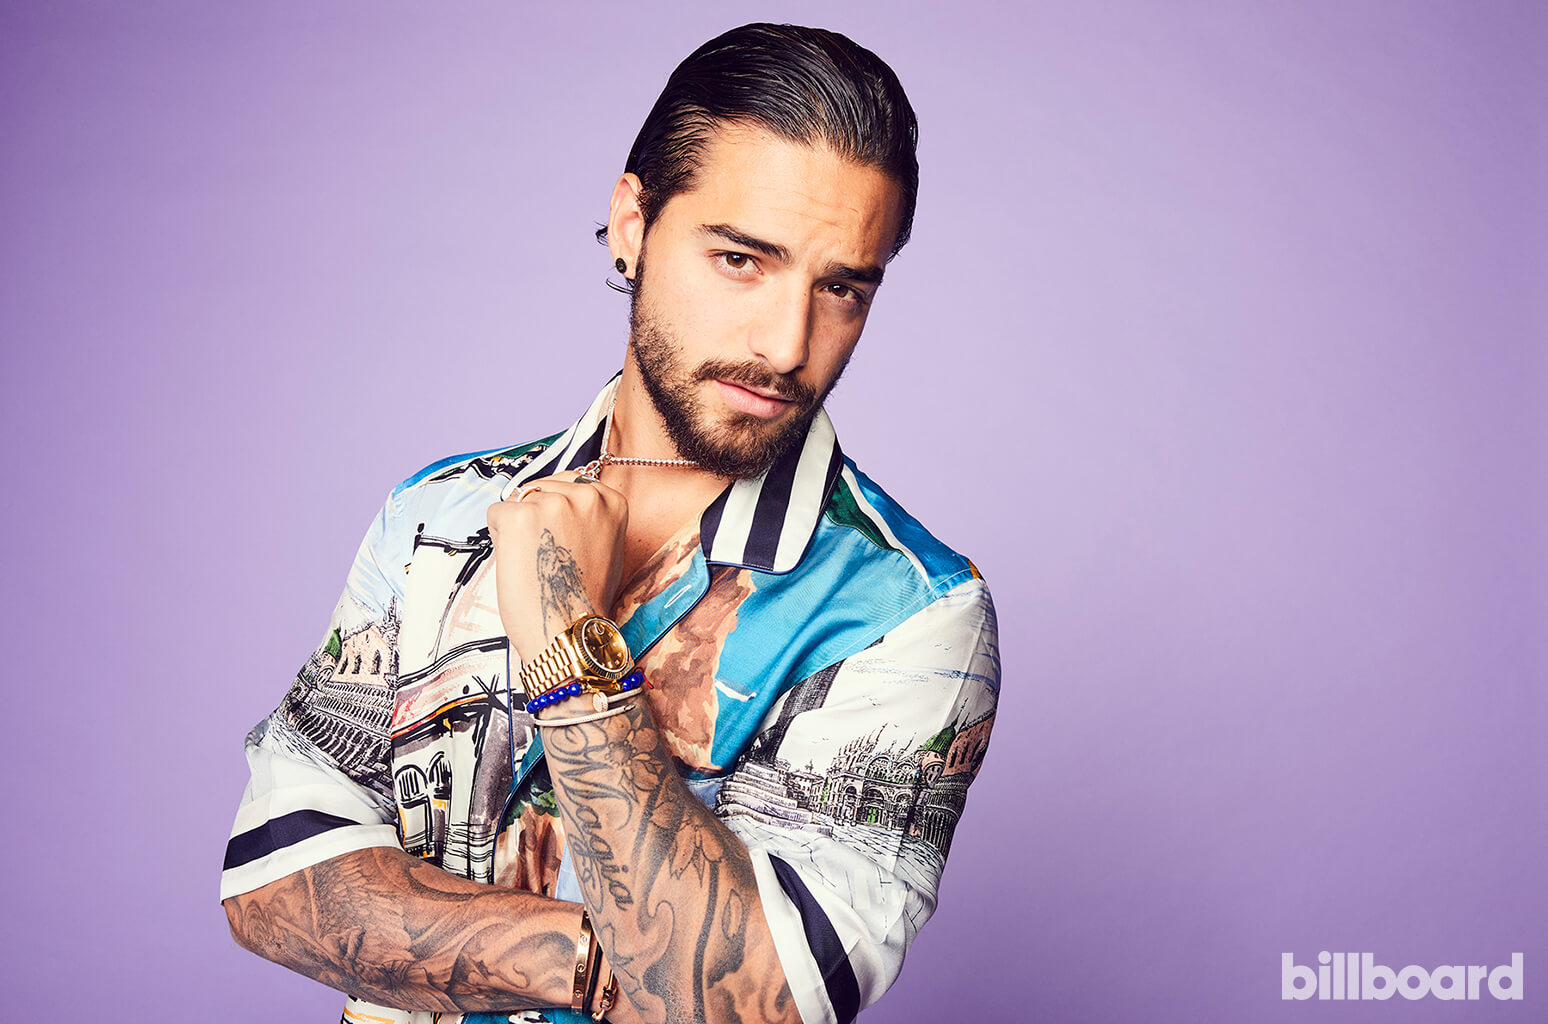 Maluma Biography Wiki, Age, Family, Net Worth, Height & Songs 360dopes